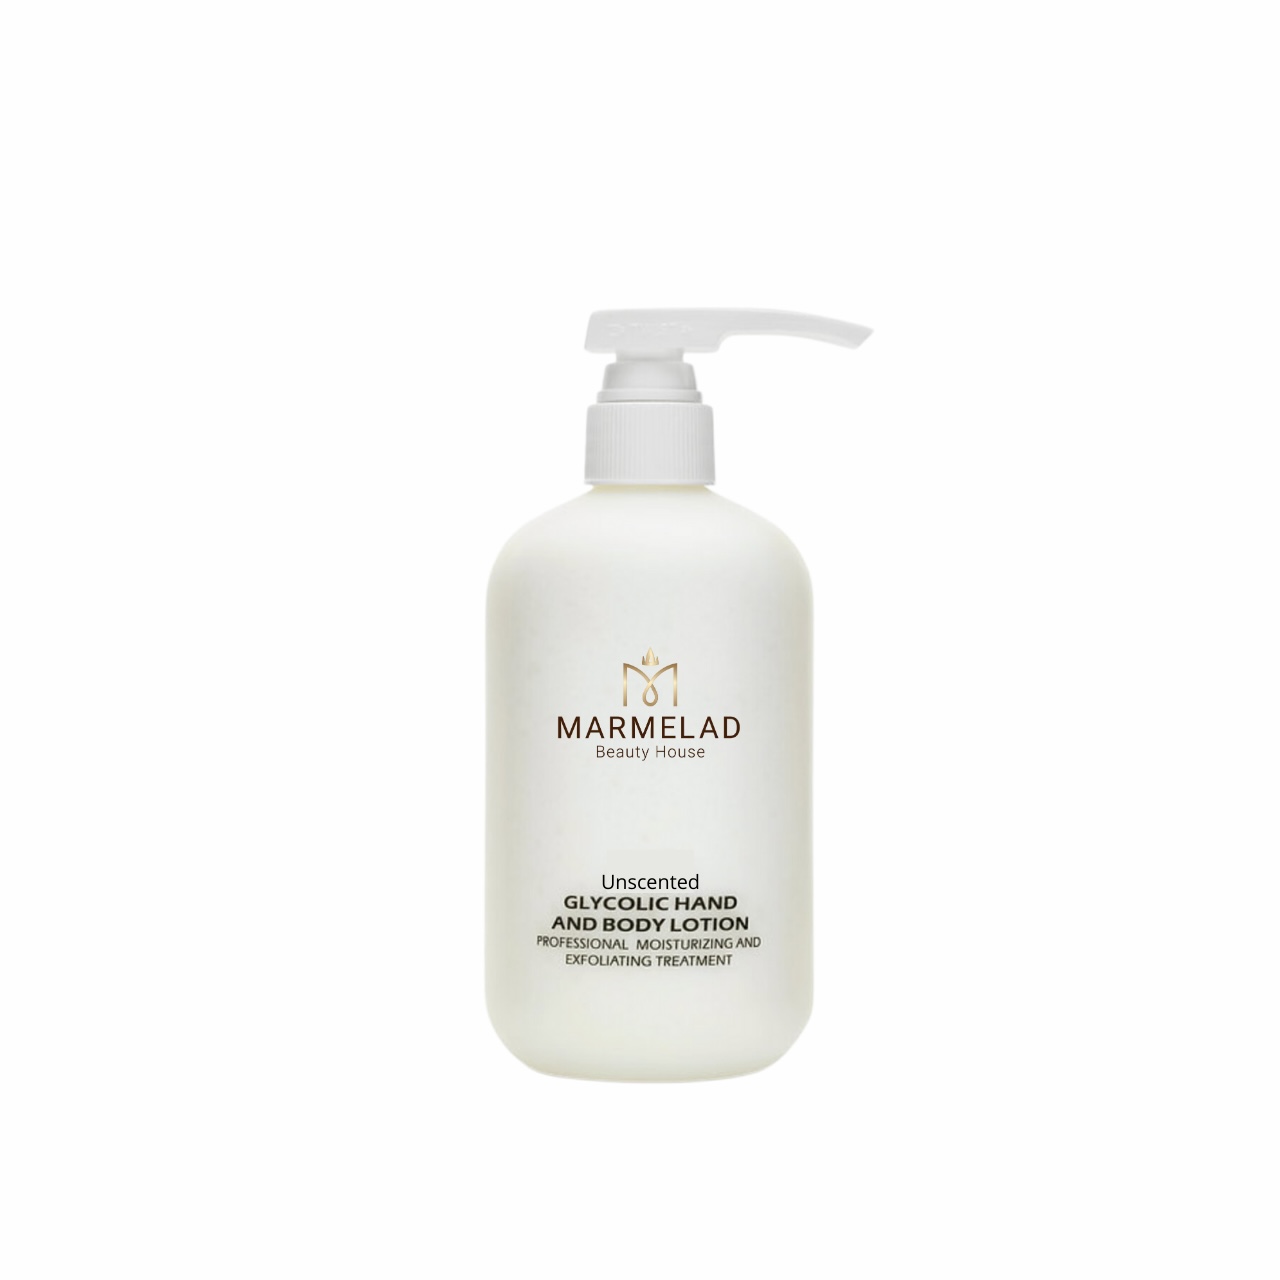 GLYCOLIC HAND AND BODY LOTION Unscented 480 ml